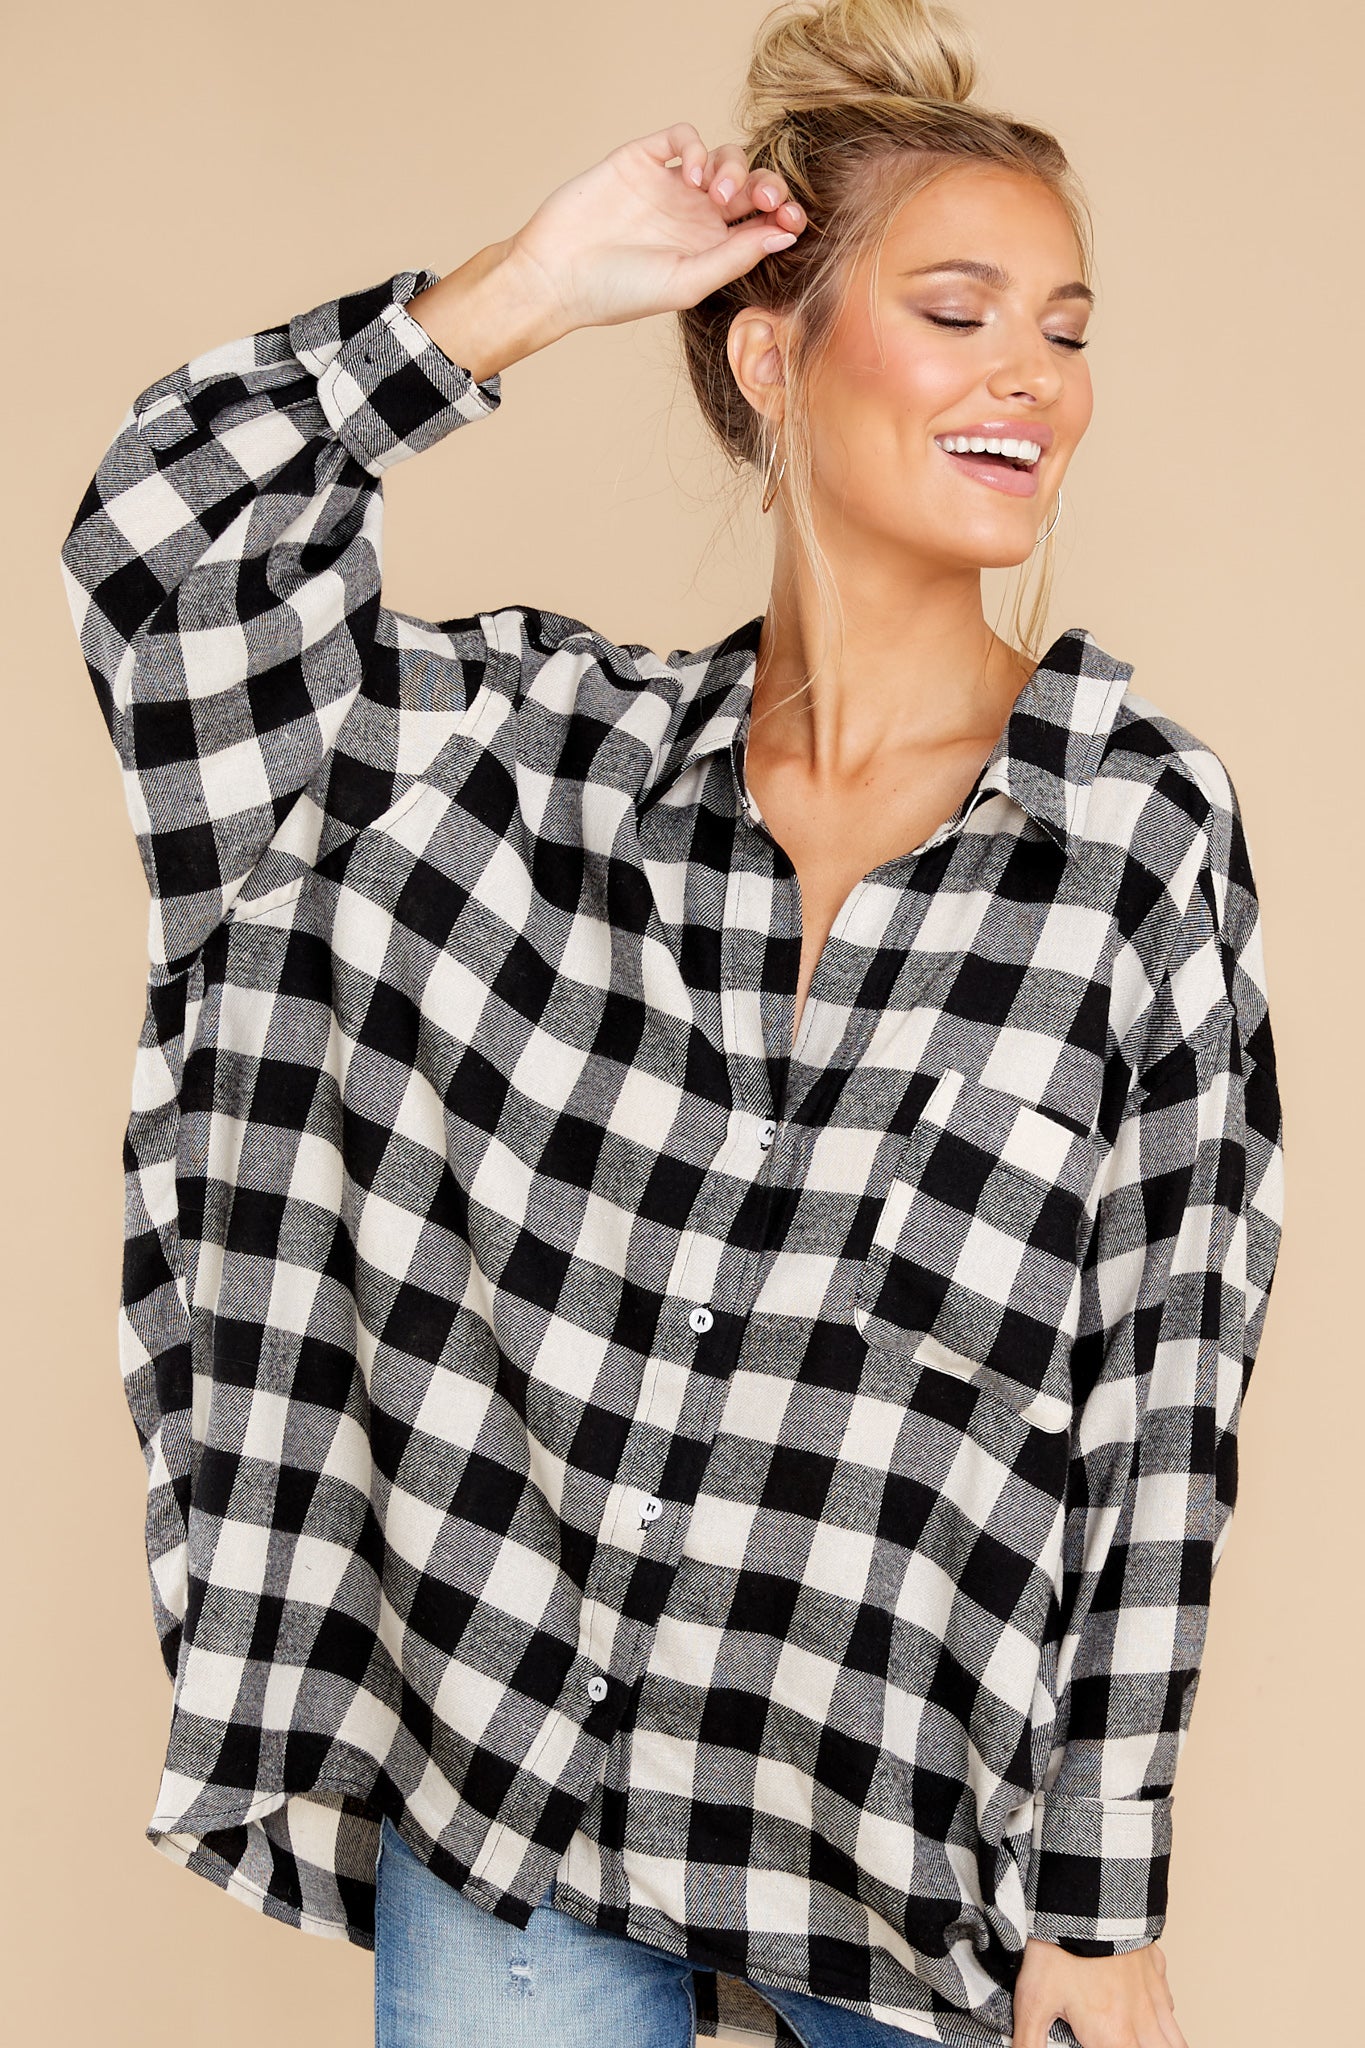 8 Chasing Cities Black And White Plaid Top at reddress.com